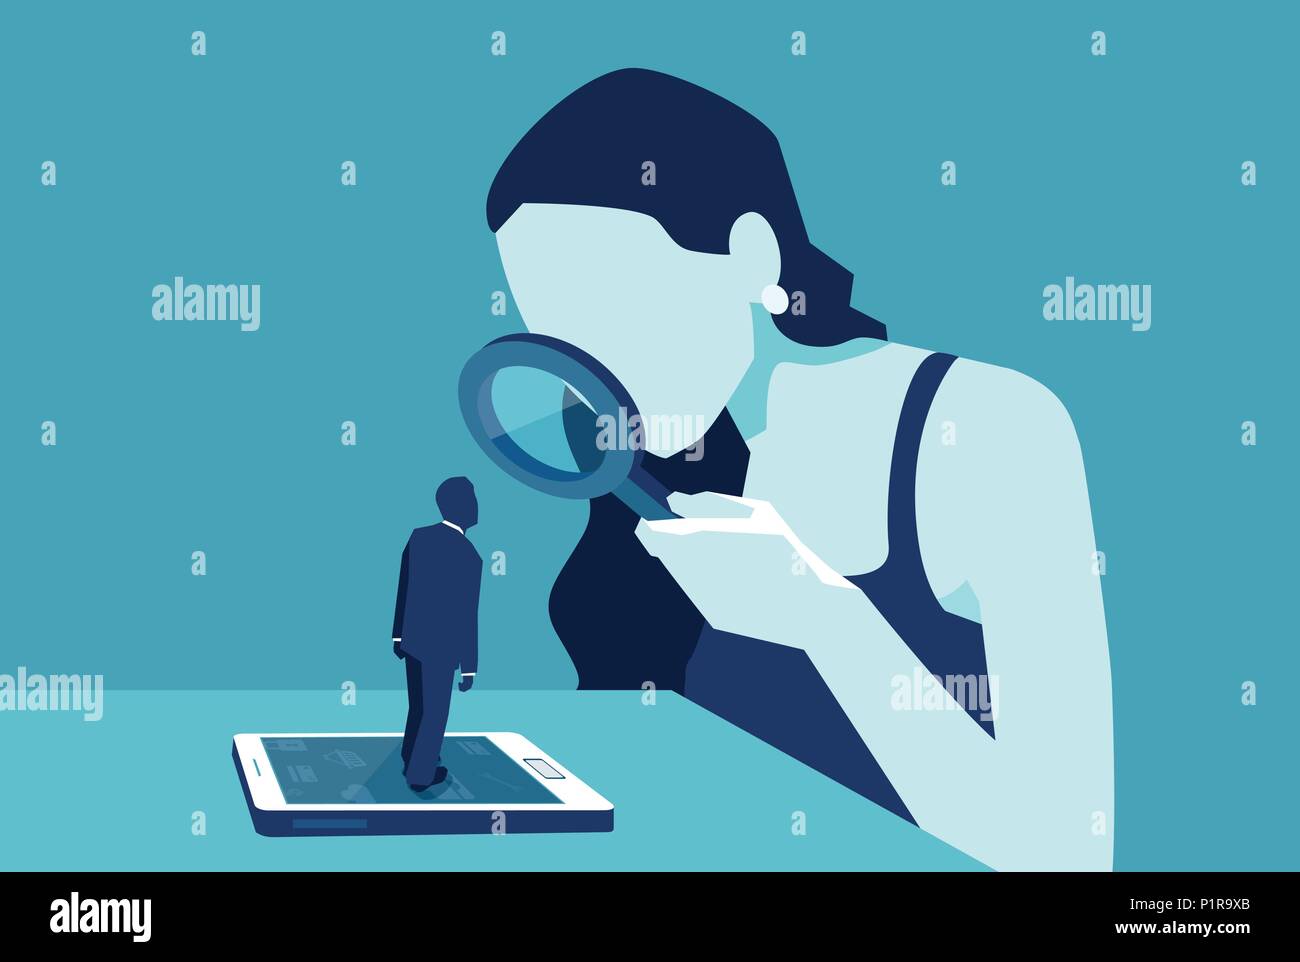 Vector of a woman with magnifying glass looking at a man standing on a modern gadget device, smartphone or tablet Stock Vector